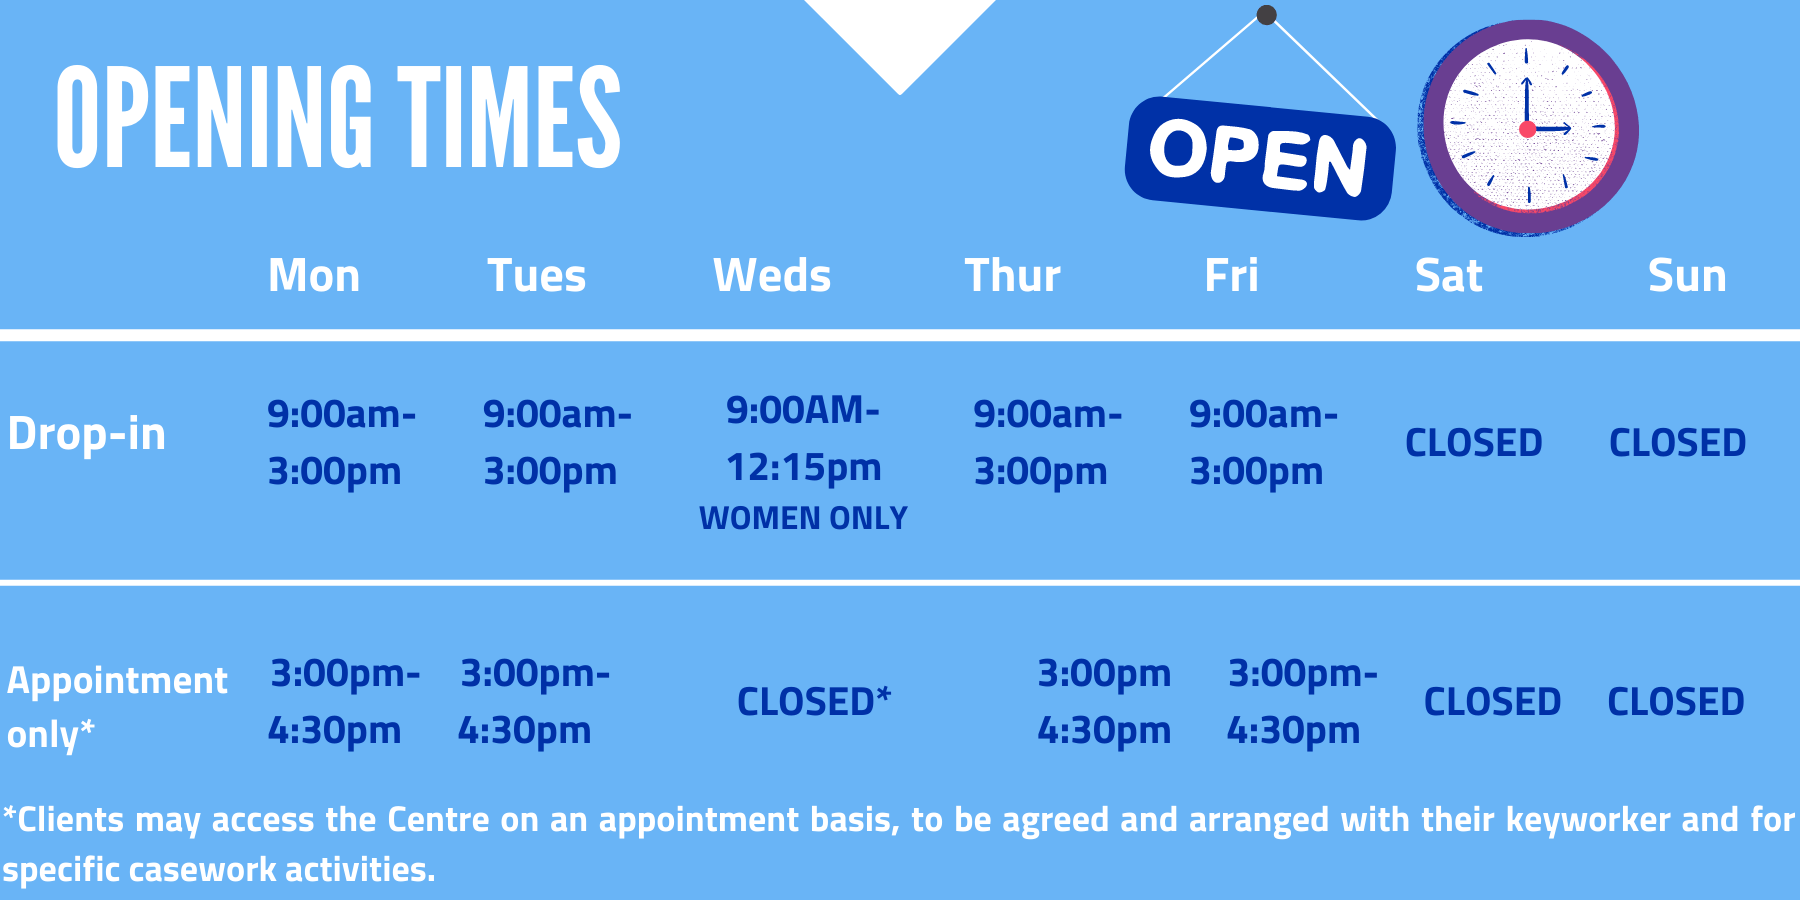 You can access The Connection’s resource centre at 12 Adelaide Street, London, WC2N 4HW on Mondays, Tuesdays, Thursdays and Fridays, at the following times - no appointment needed: In the morning: 9.00am -4pm.